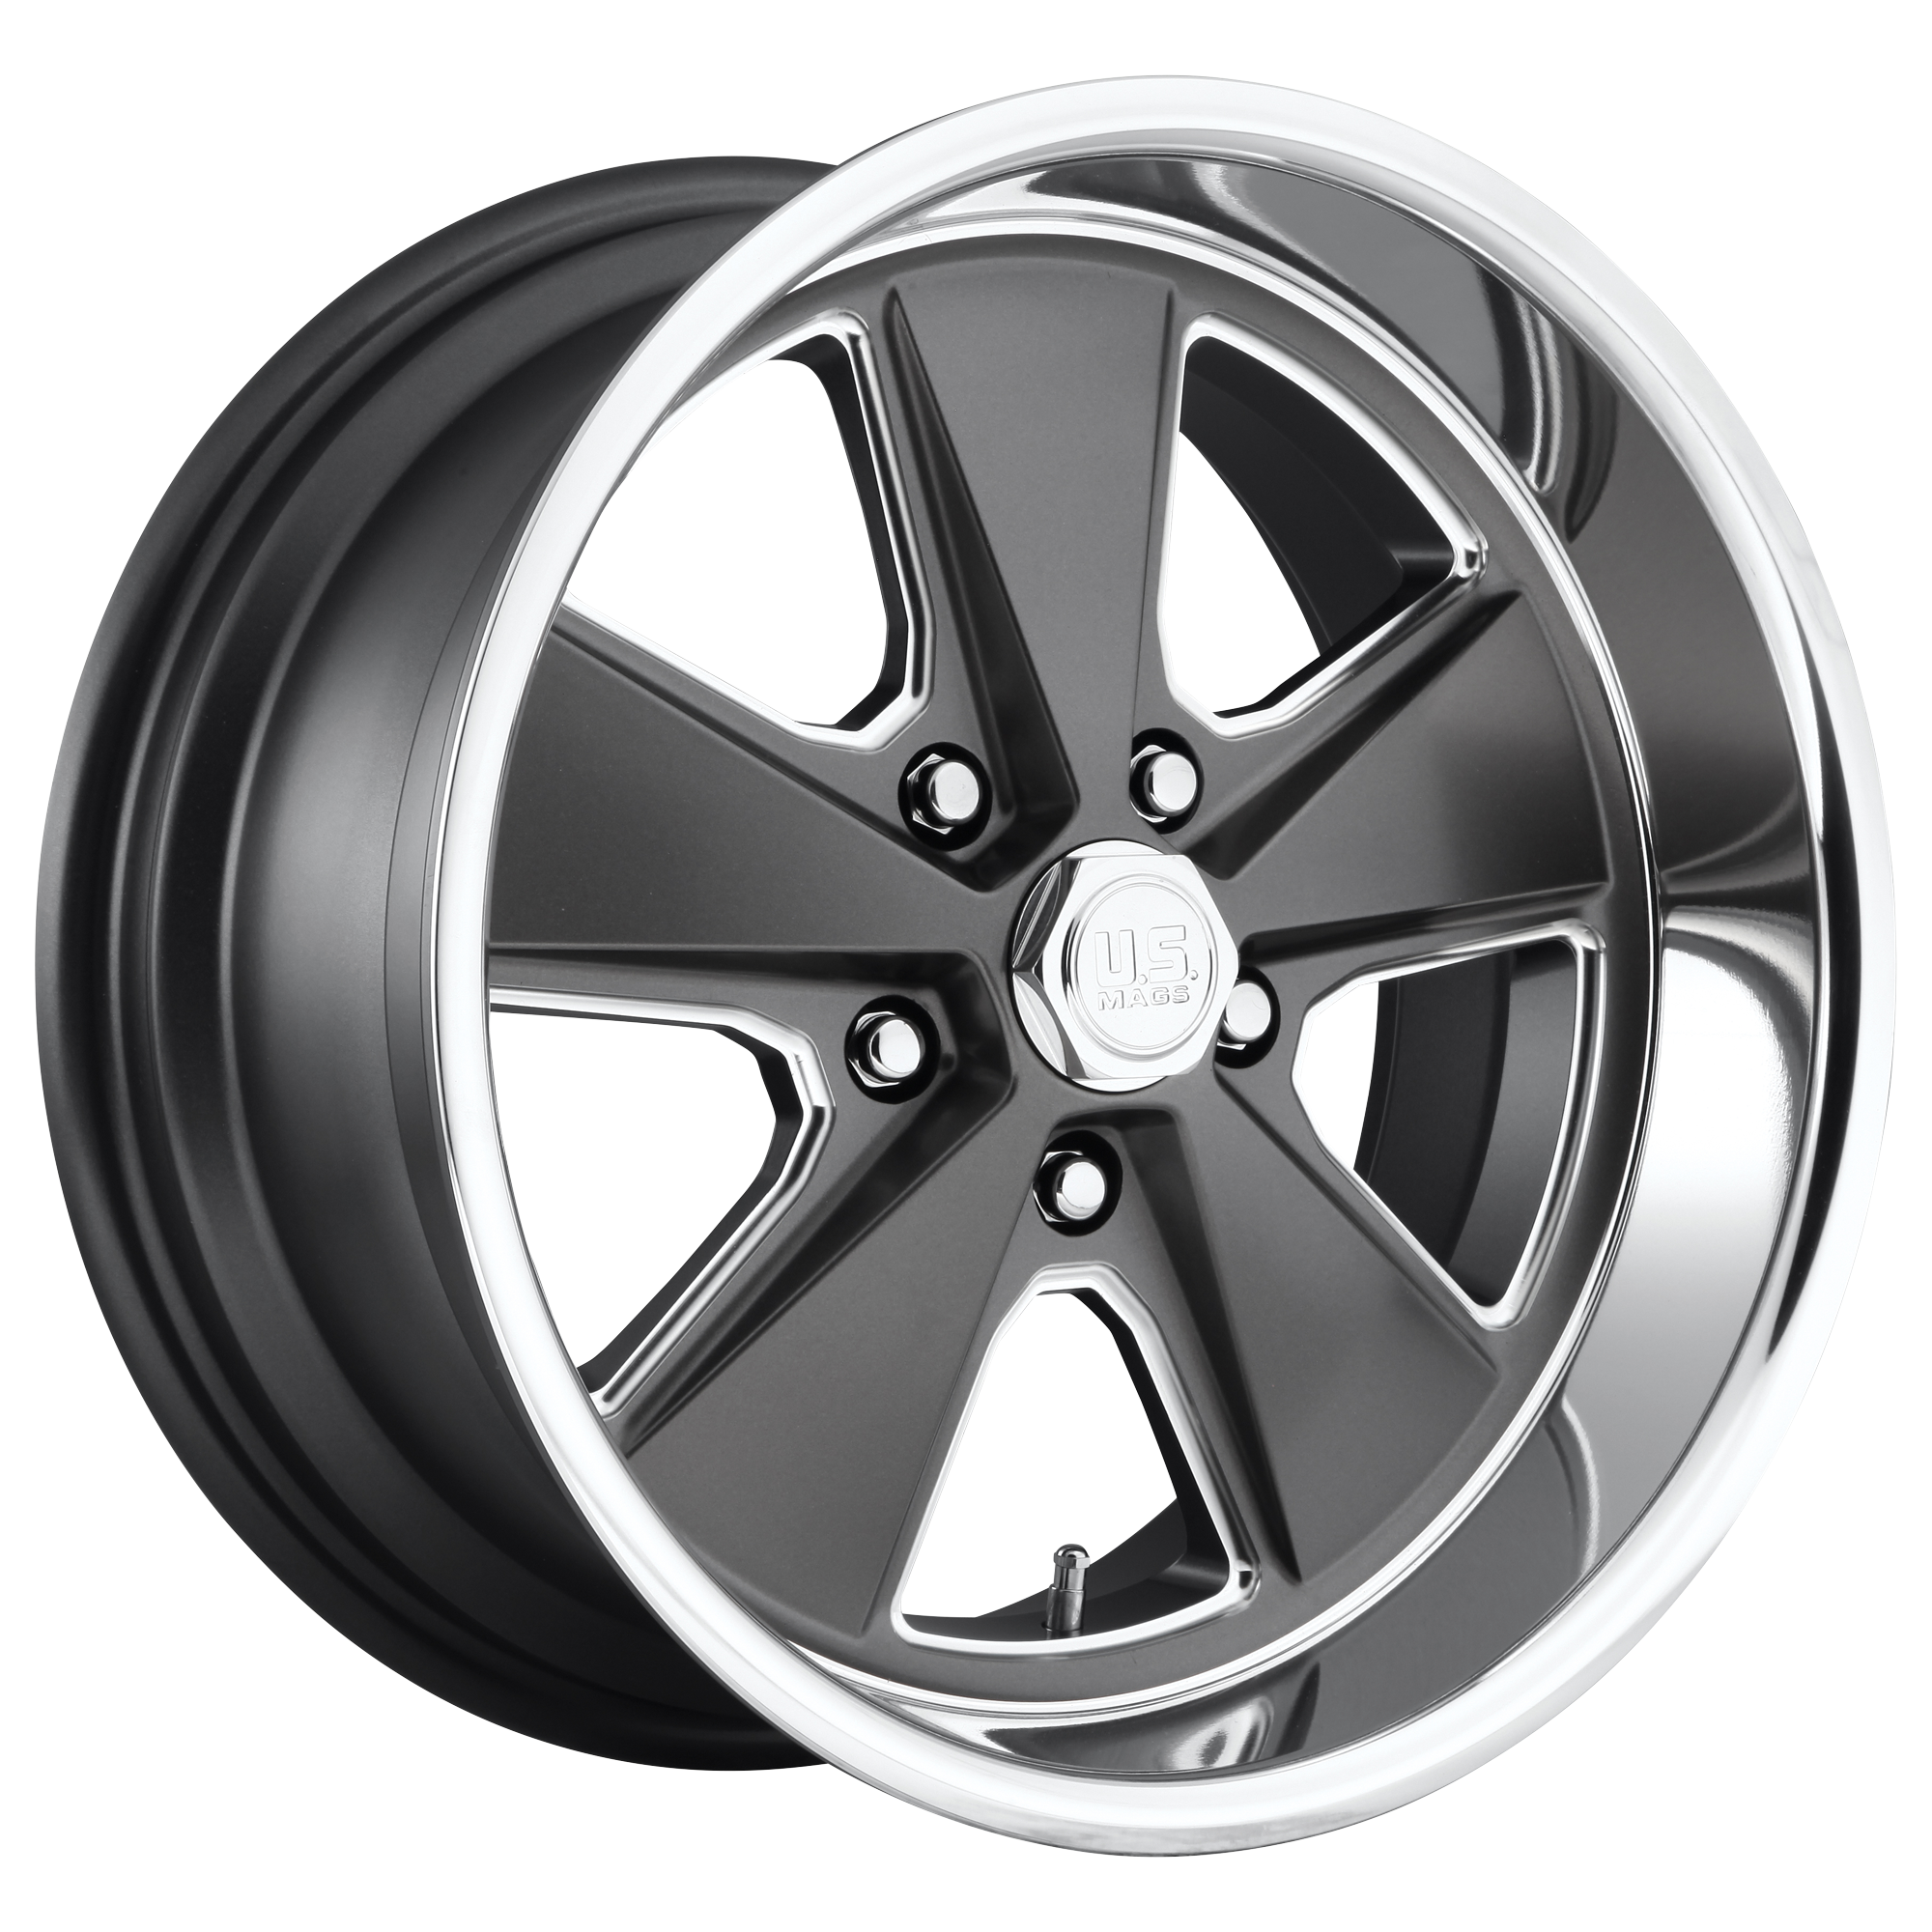 ROADSTER 20x8 5x120.65 MATTE GUN METAL MACHINED (1 mm) - Tires and Engine Performance